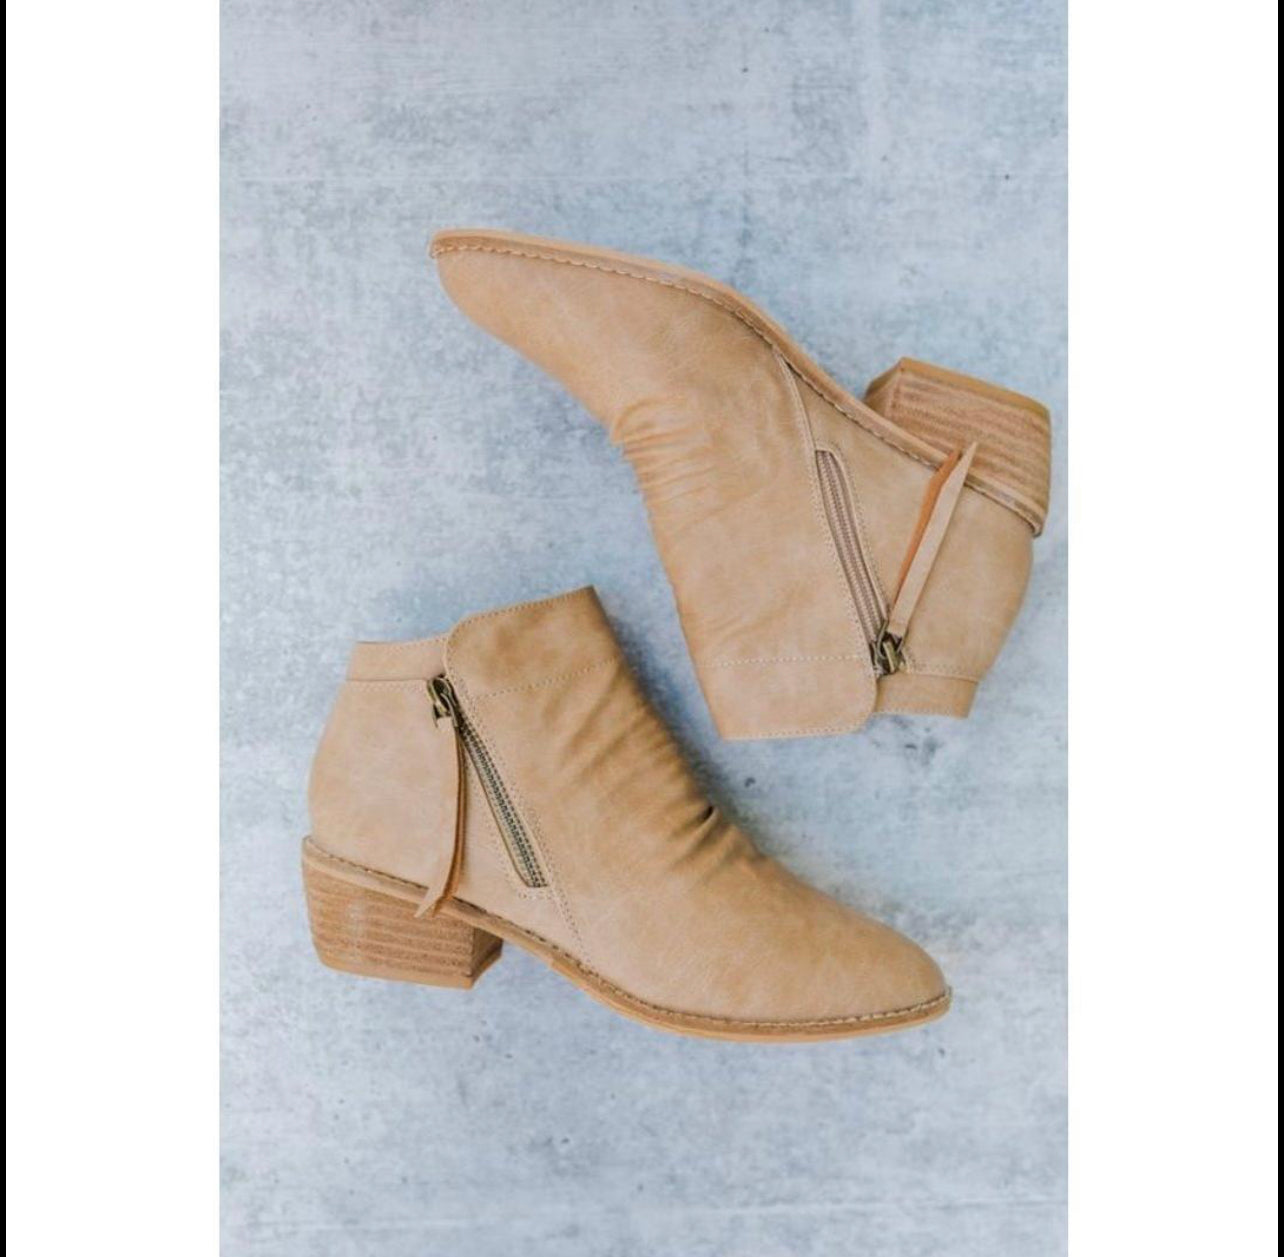 Butternut taupe booties